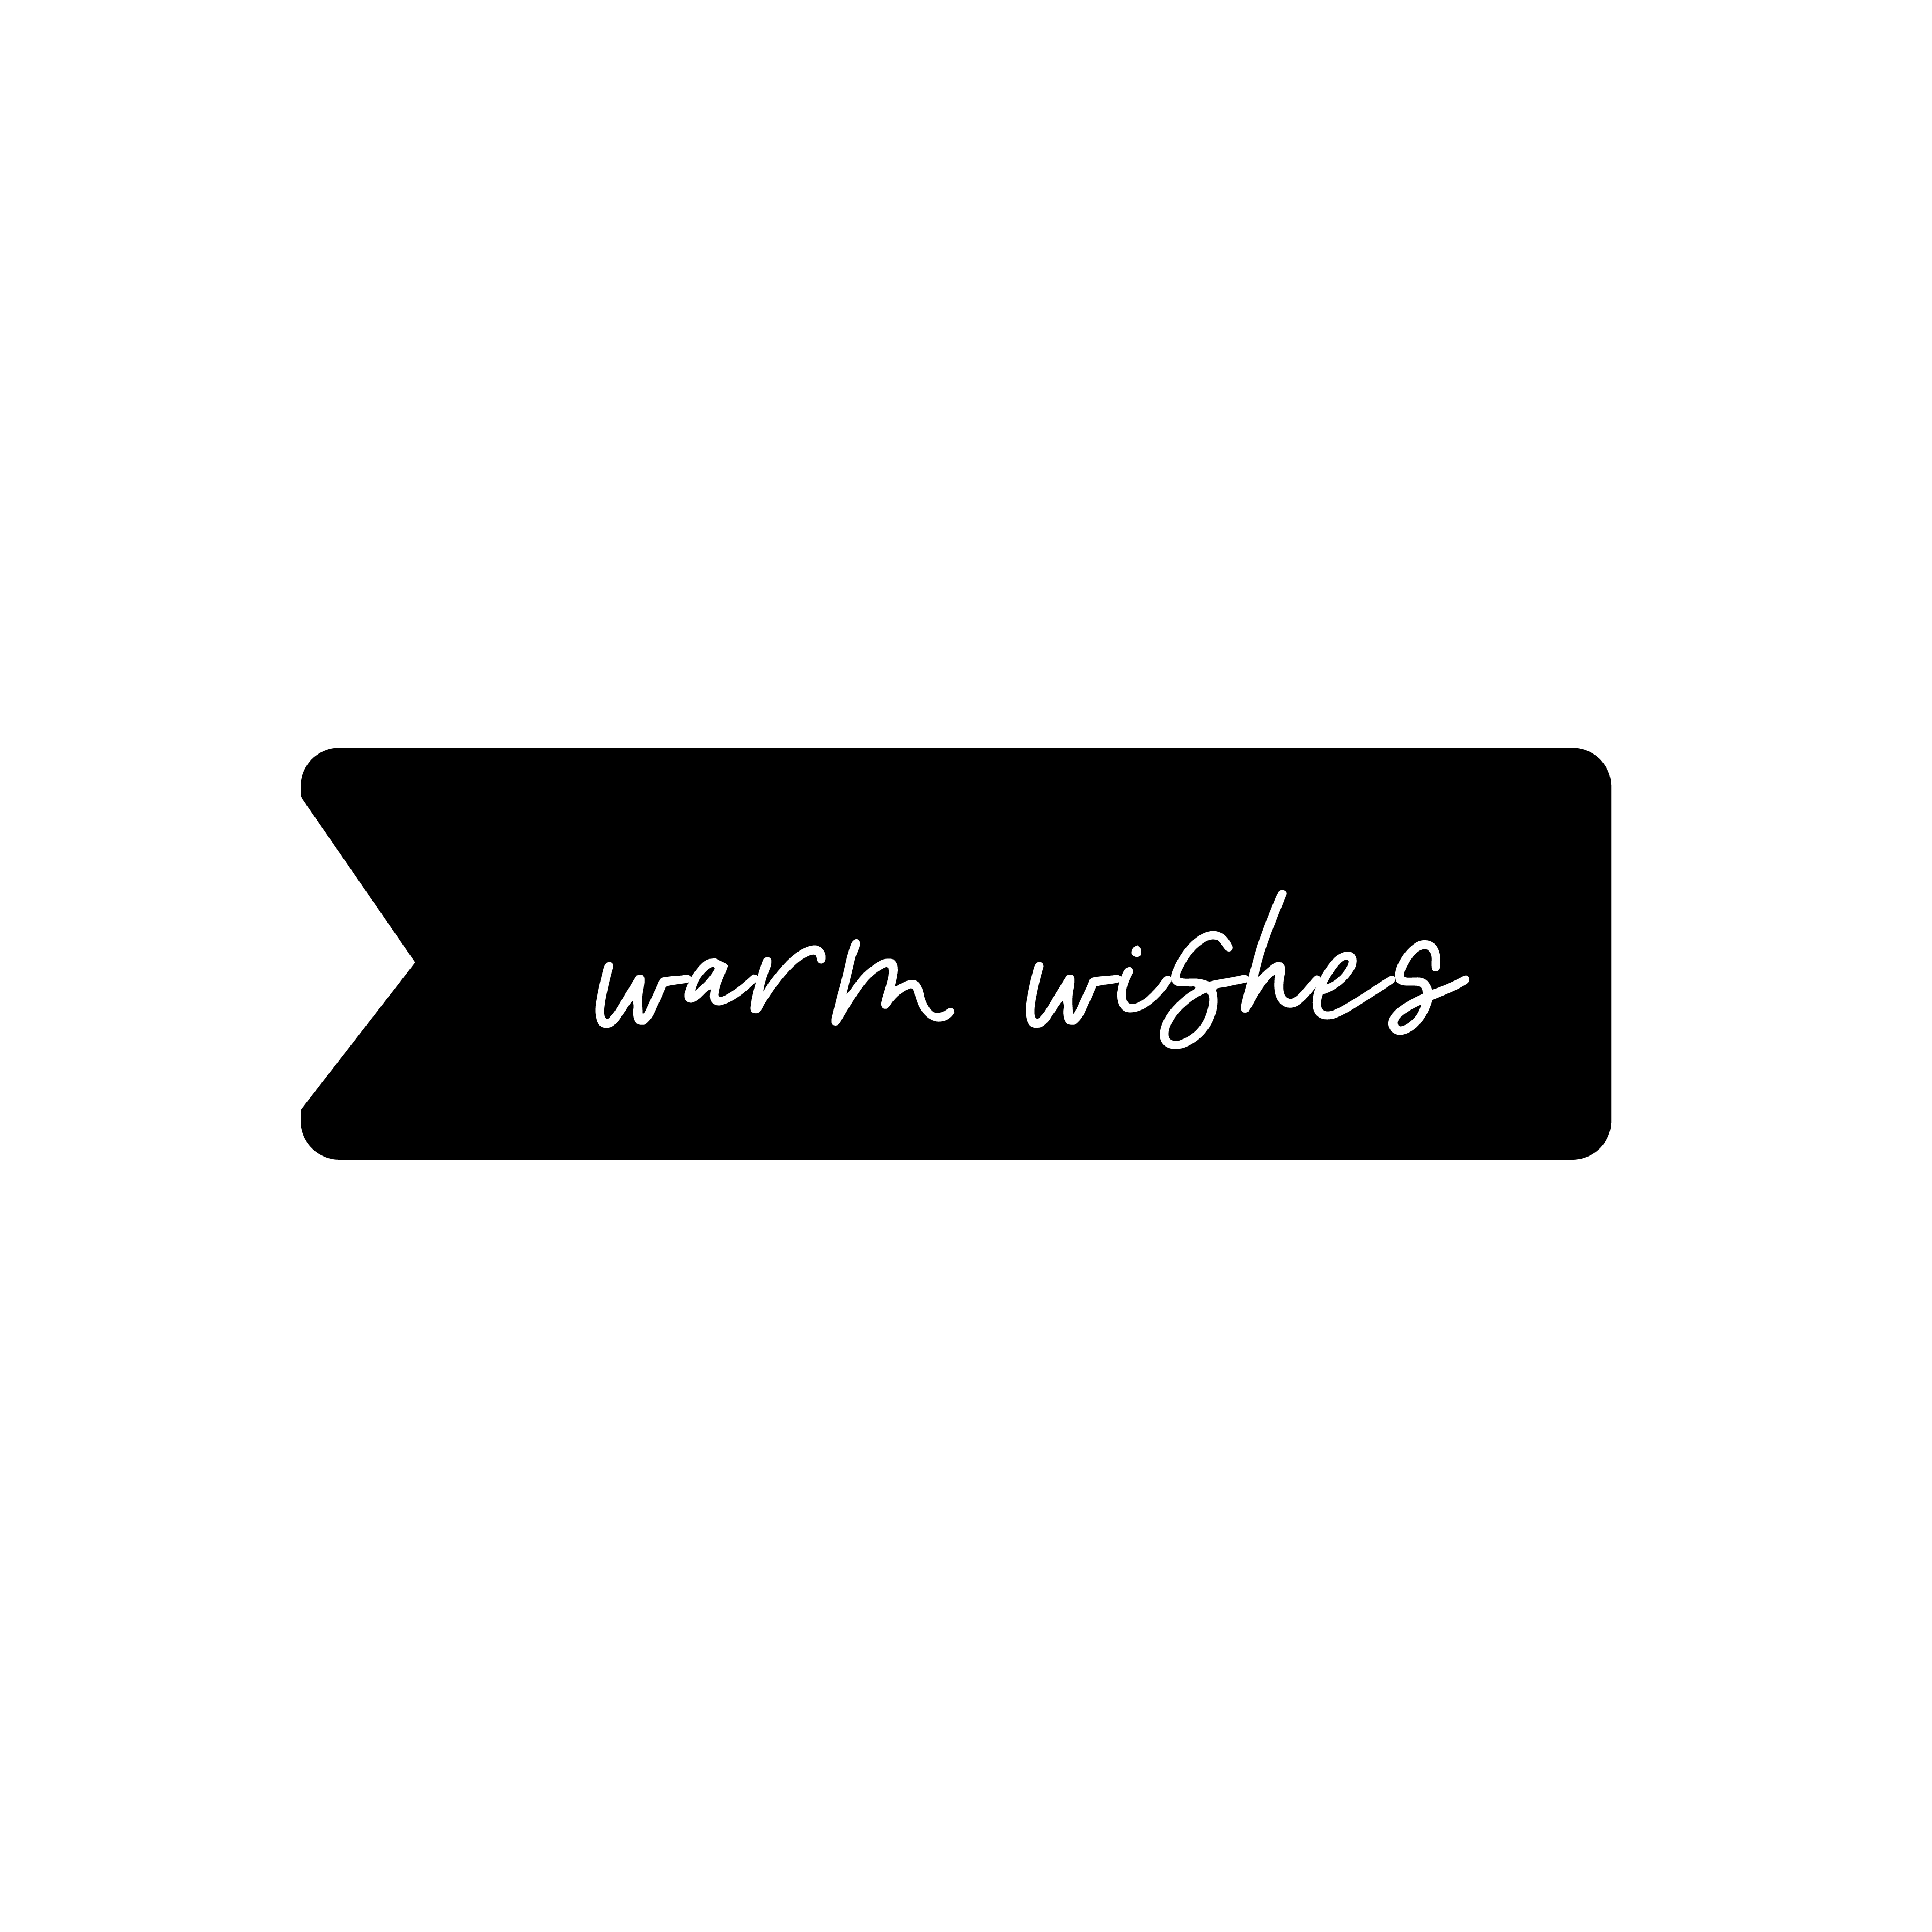 Warm Wishes 1 SVG Cut File - Snap Click Supply Co.